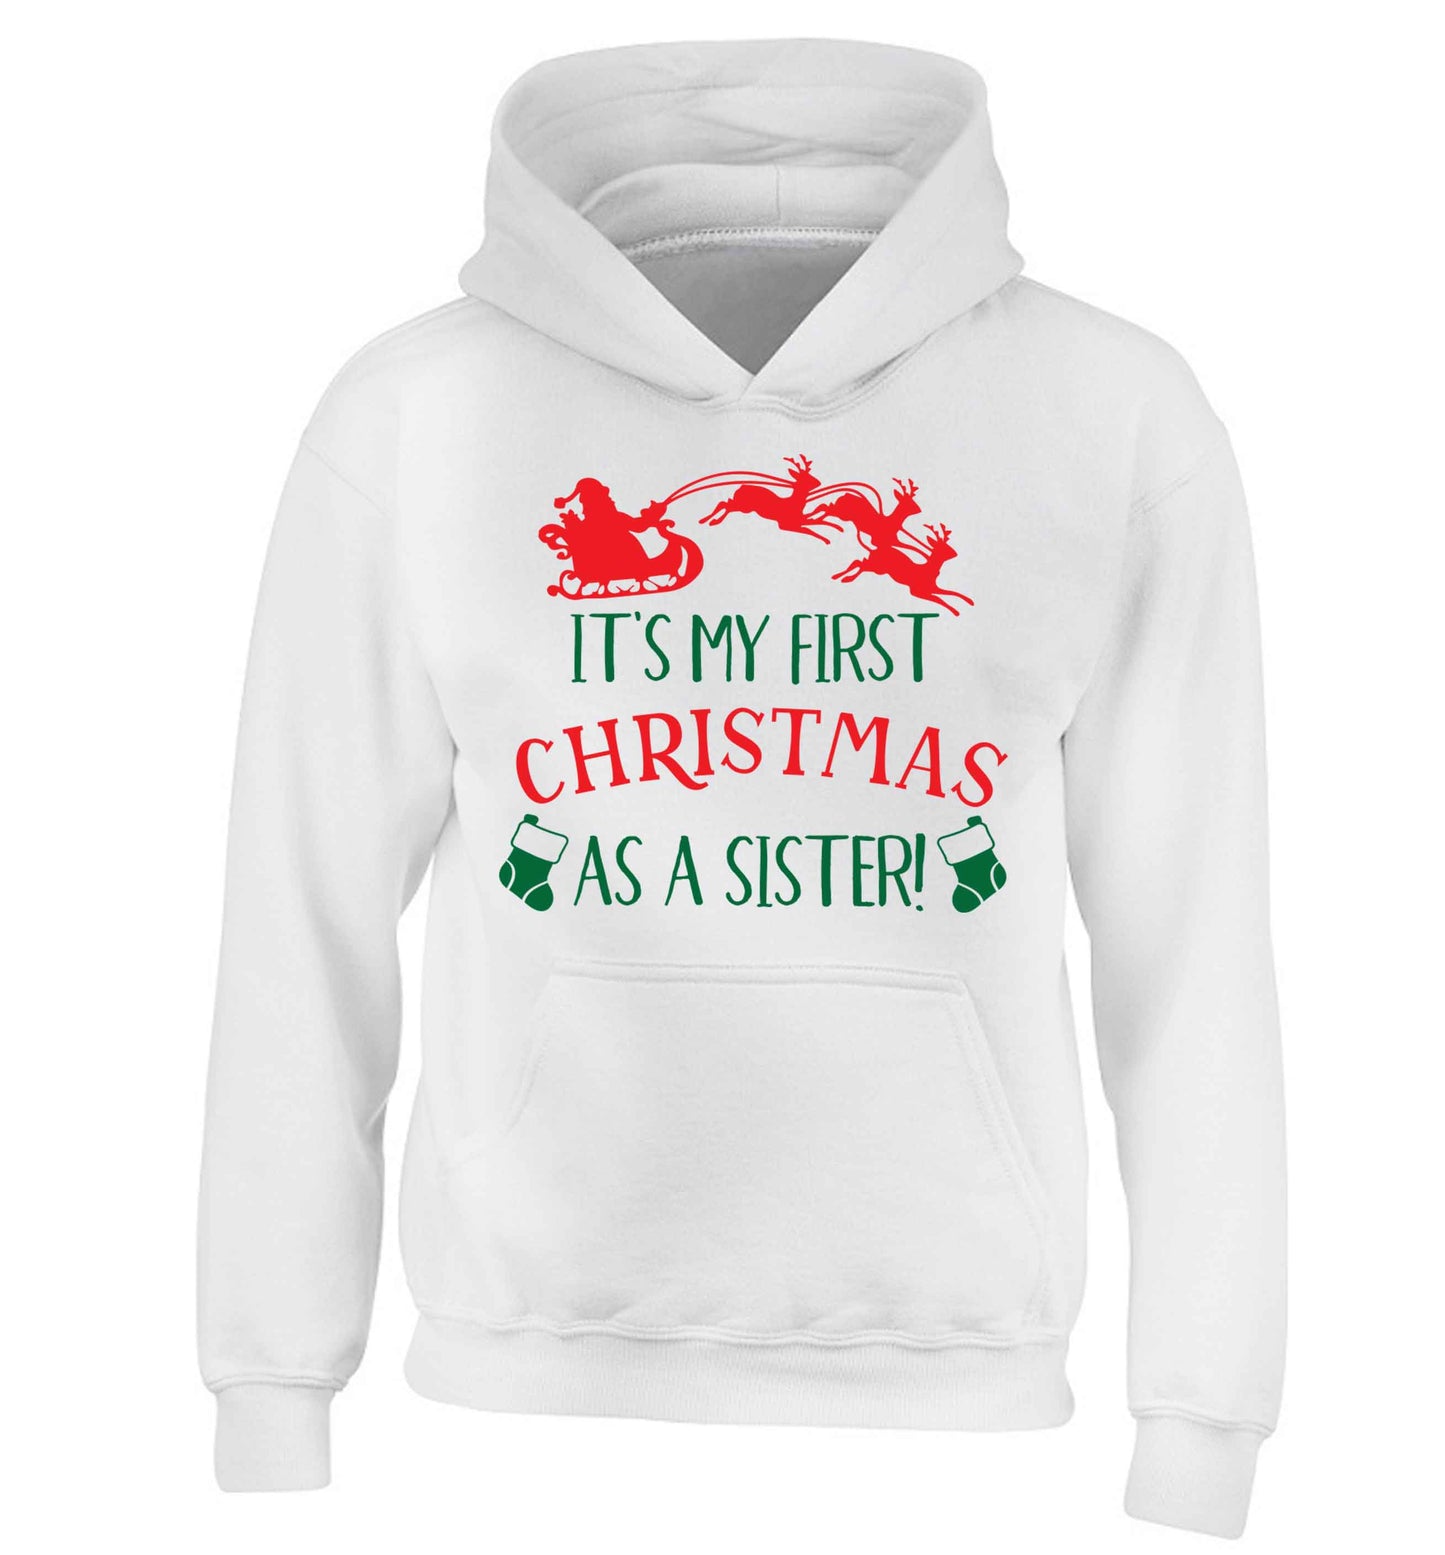 It's my first Christmas as a sister! children's white hoodie 12-13 Years